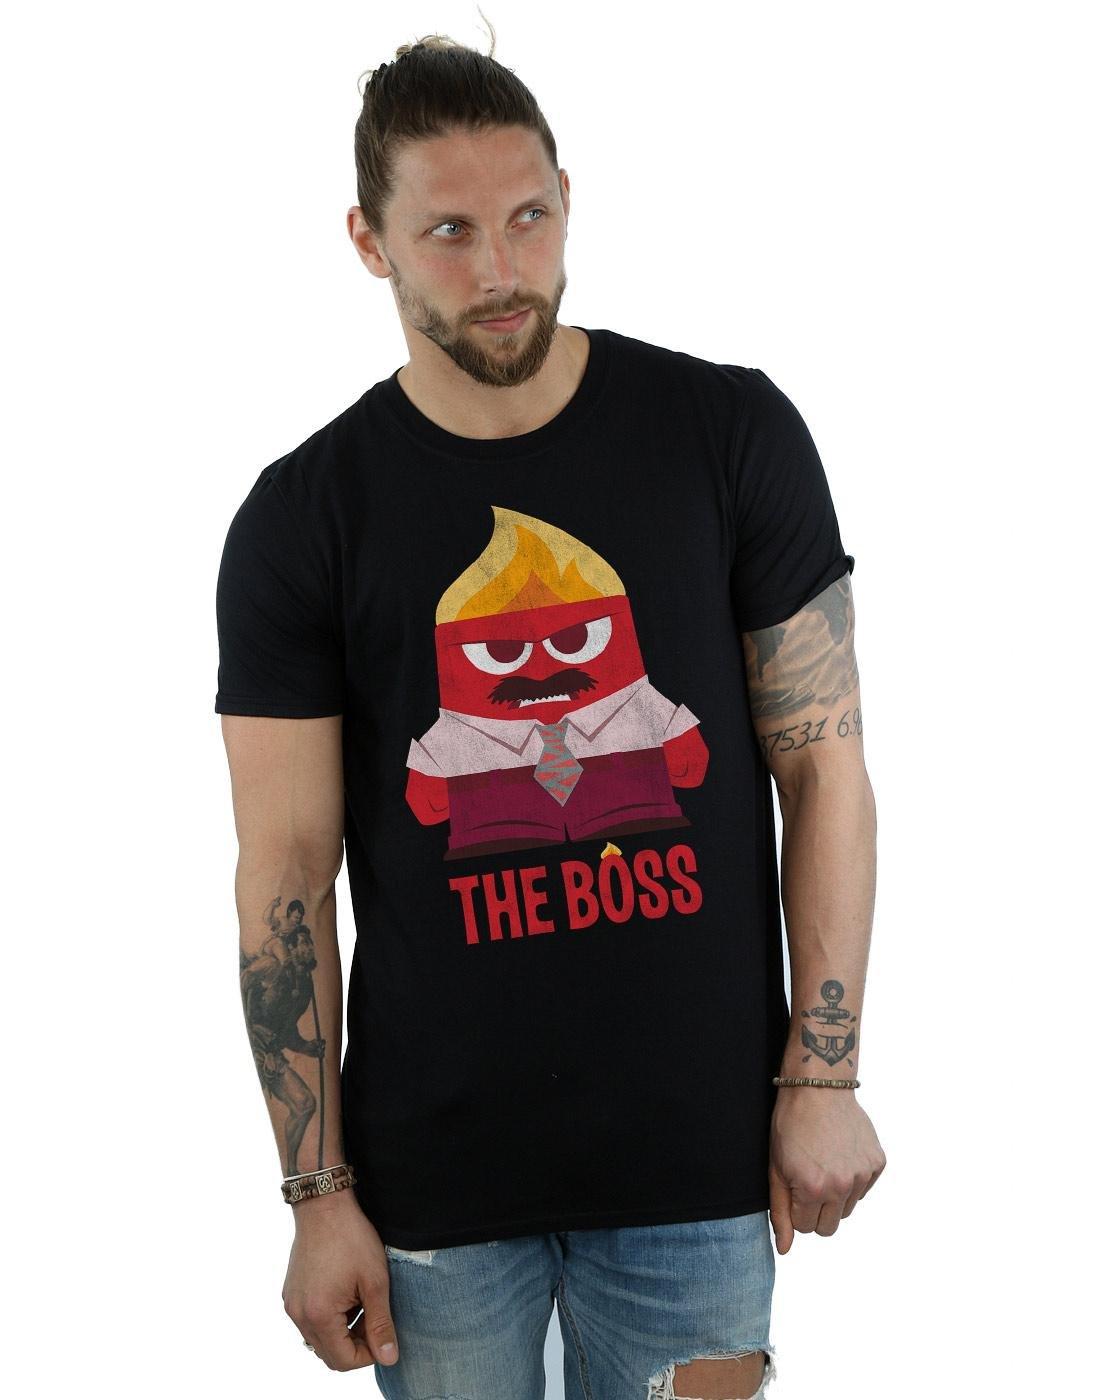 Inside Out  The Boss TShirt 